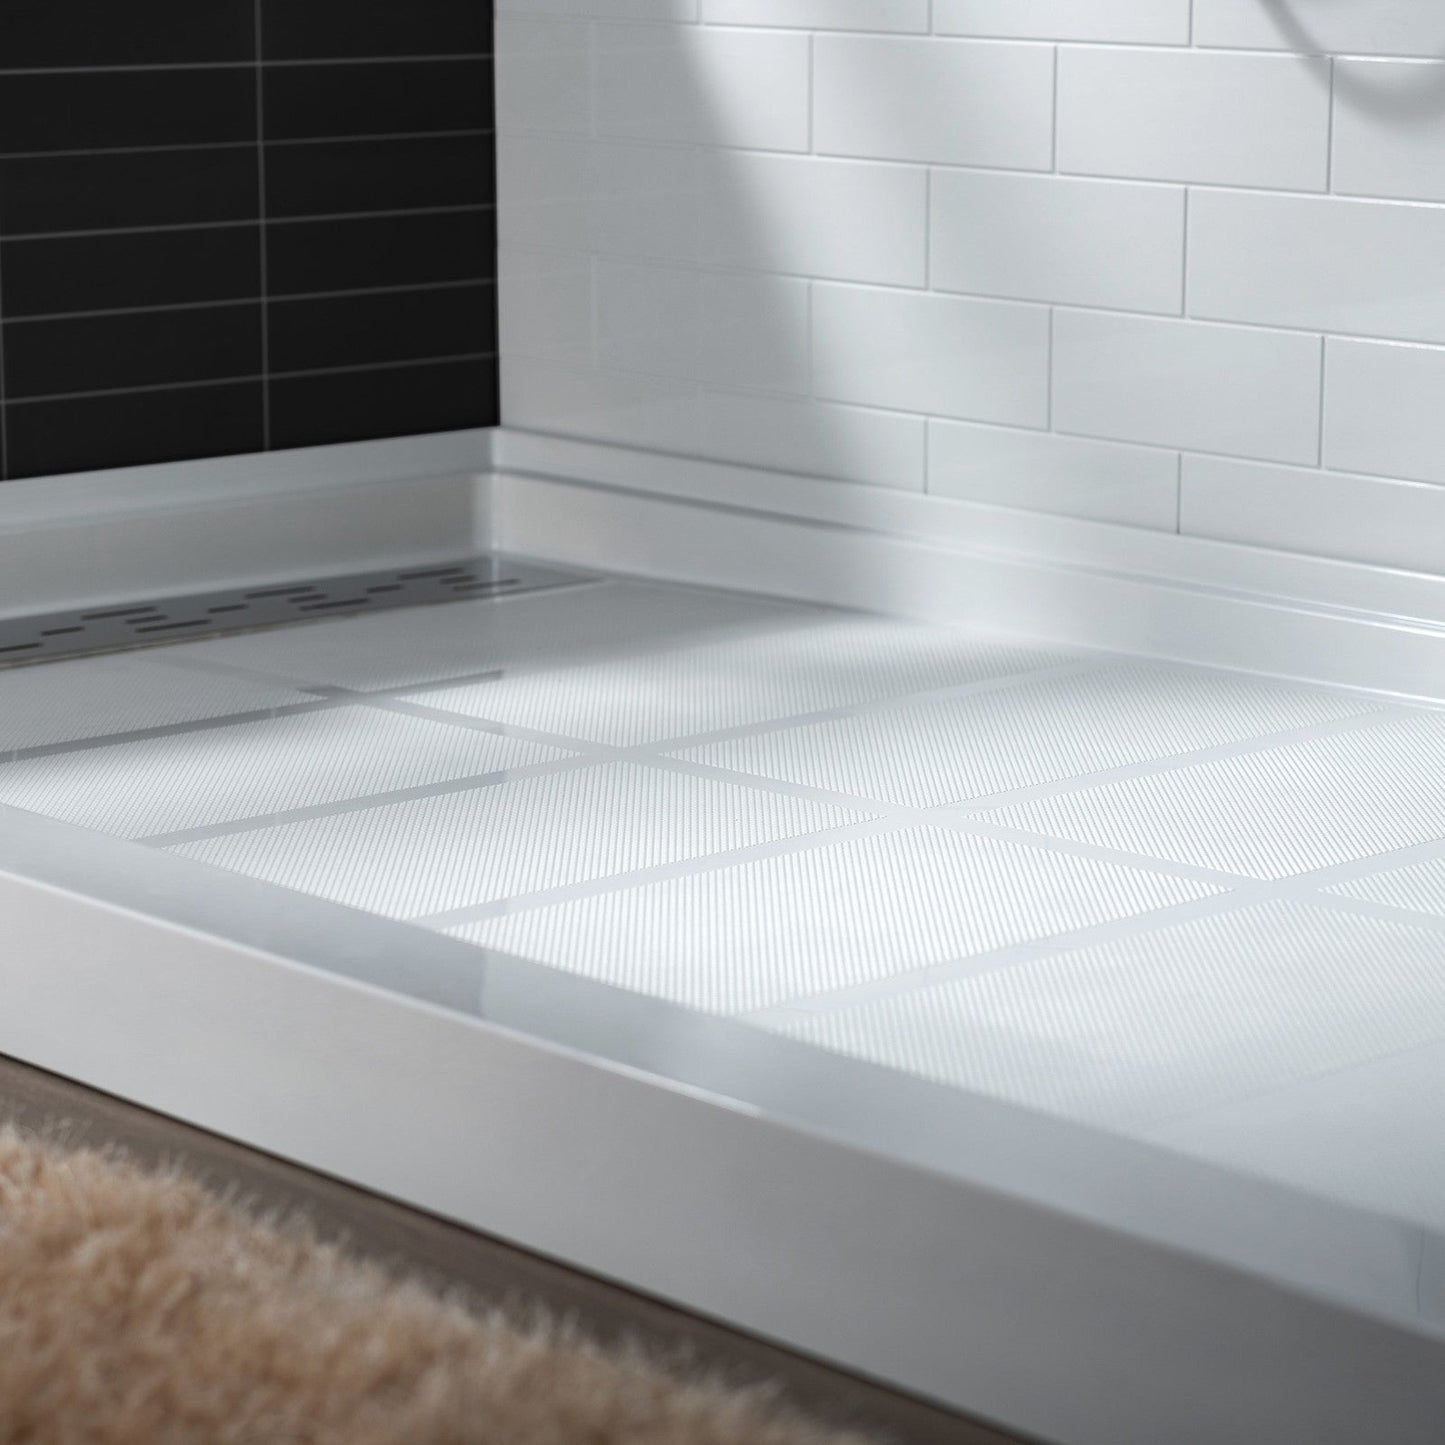 WoodBridge 48" x 32" White Solid Surface Shower Base Left Drain Location With Brushed Nickel Trench Drain Cover